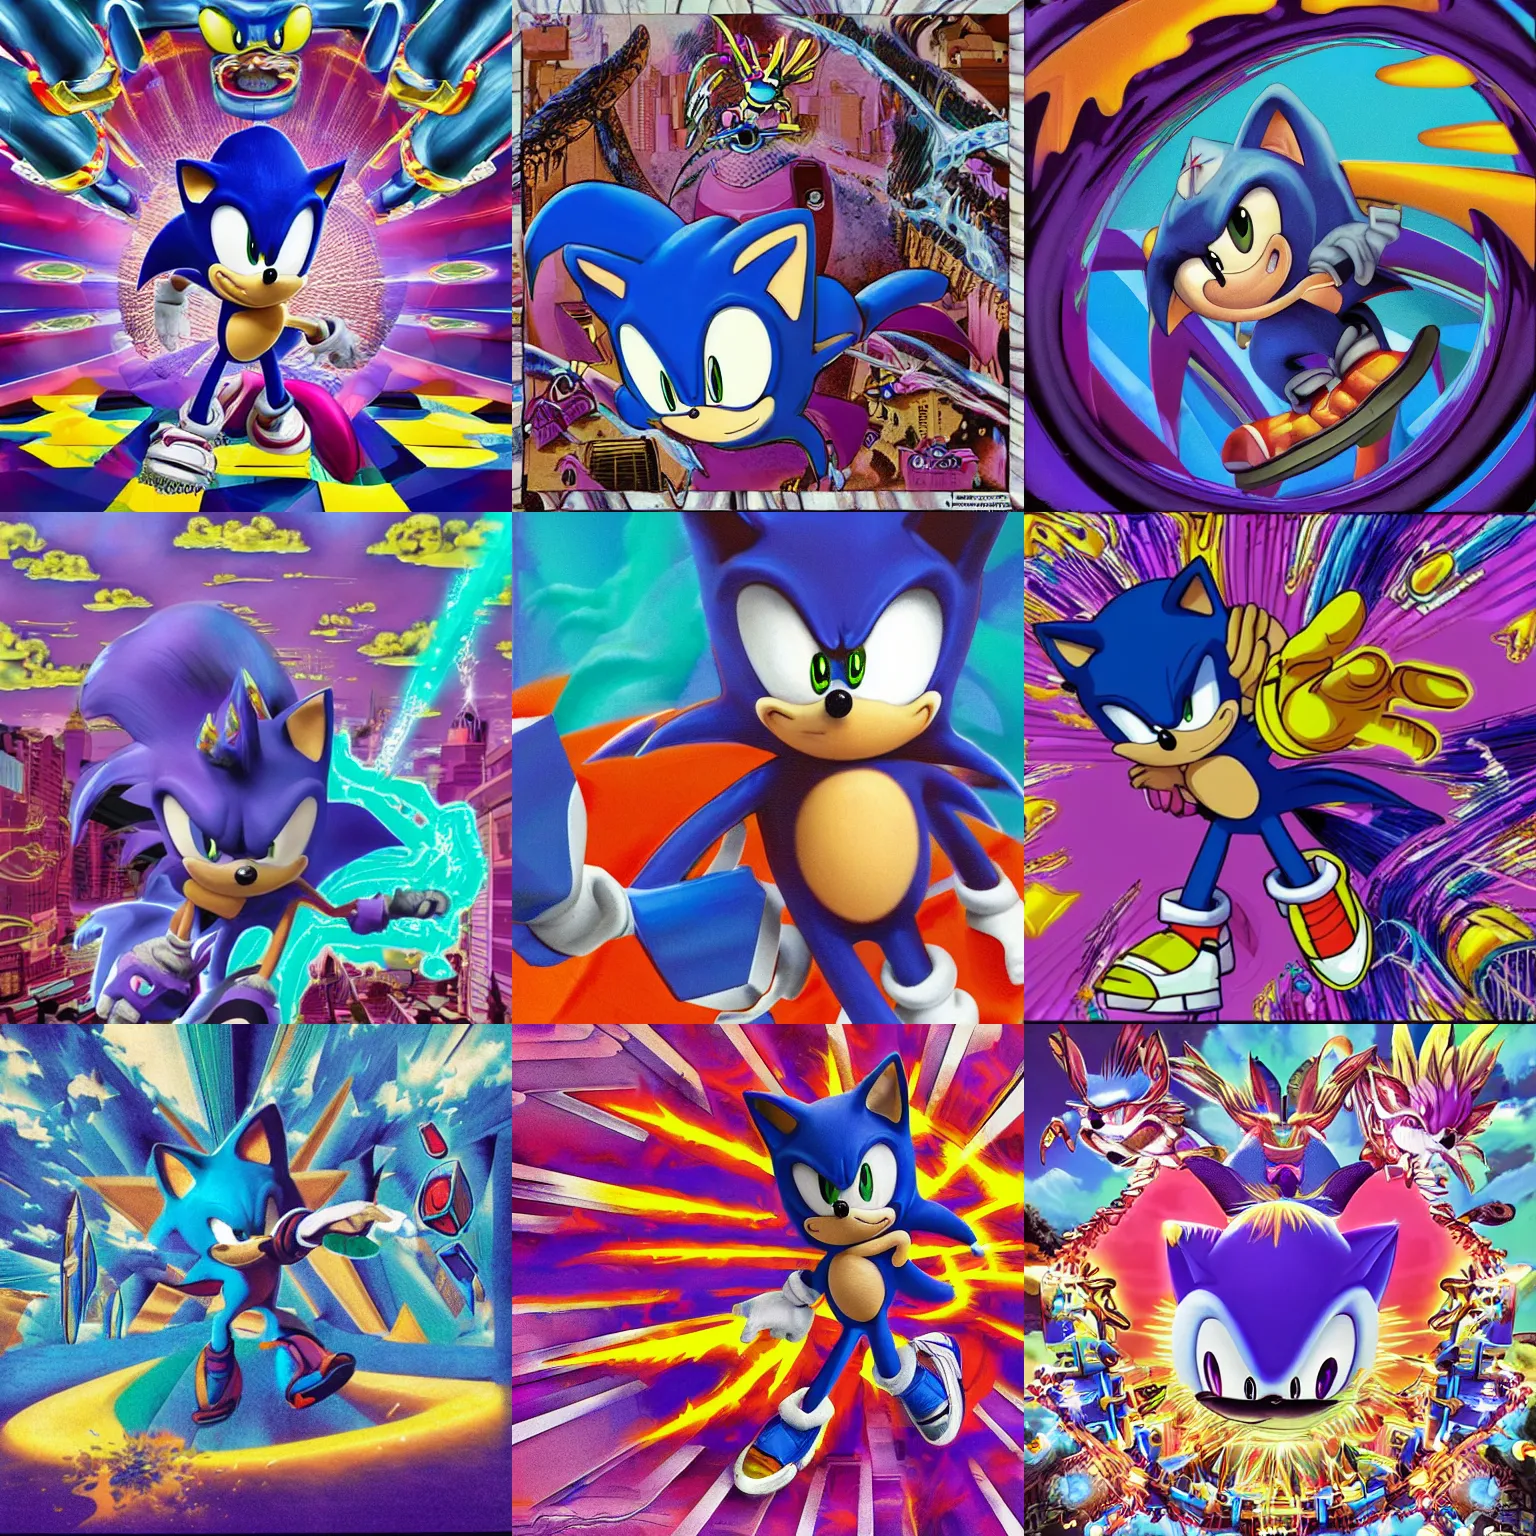 Prompt: sonic the hedgehog in a surreal, sharp, detailed professional, high quality airbrush art MGMT album cover of a liquid dissolving LSD DMT blue sonic the hedgehog flying through vaporwave synthwave, purple checkerboard background, 1990s 1992 Sega Genesis video game album cover